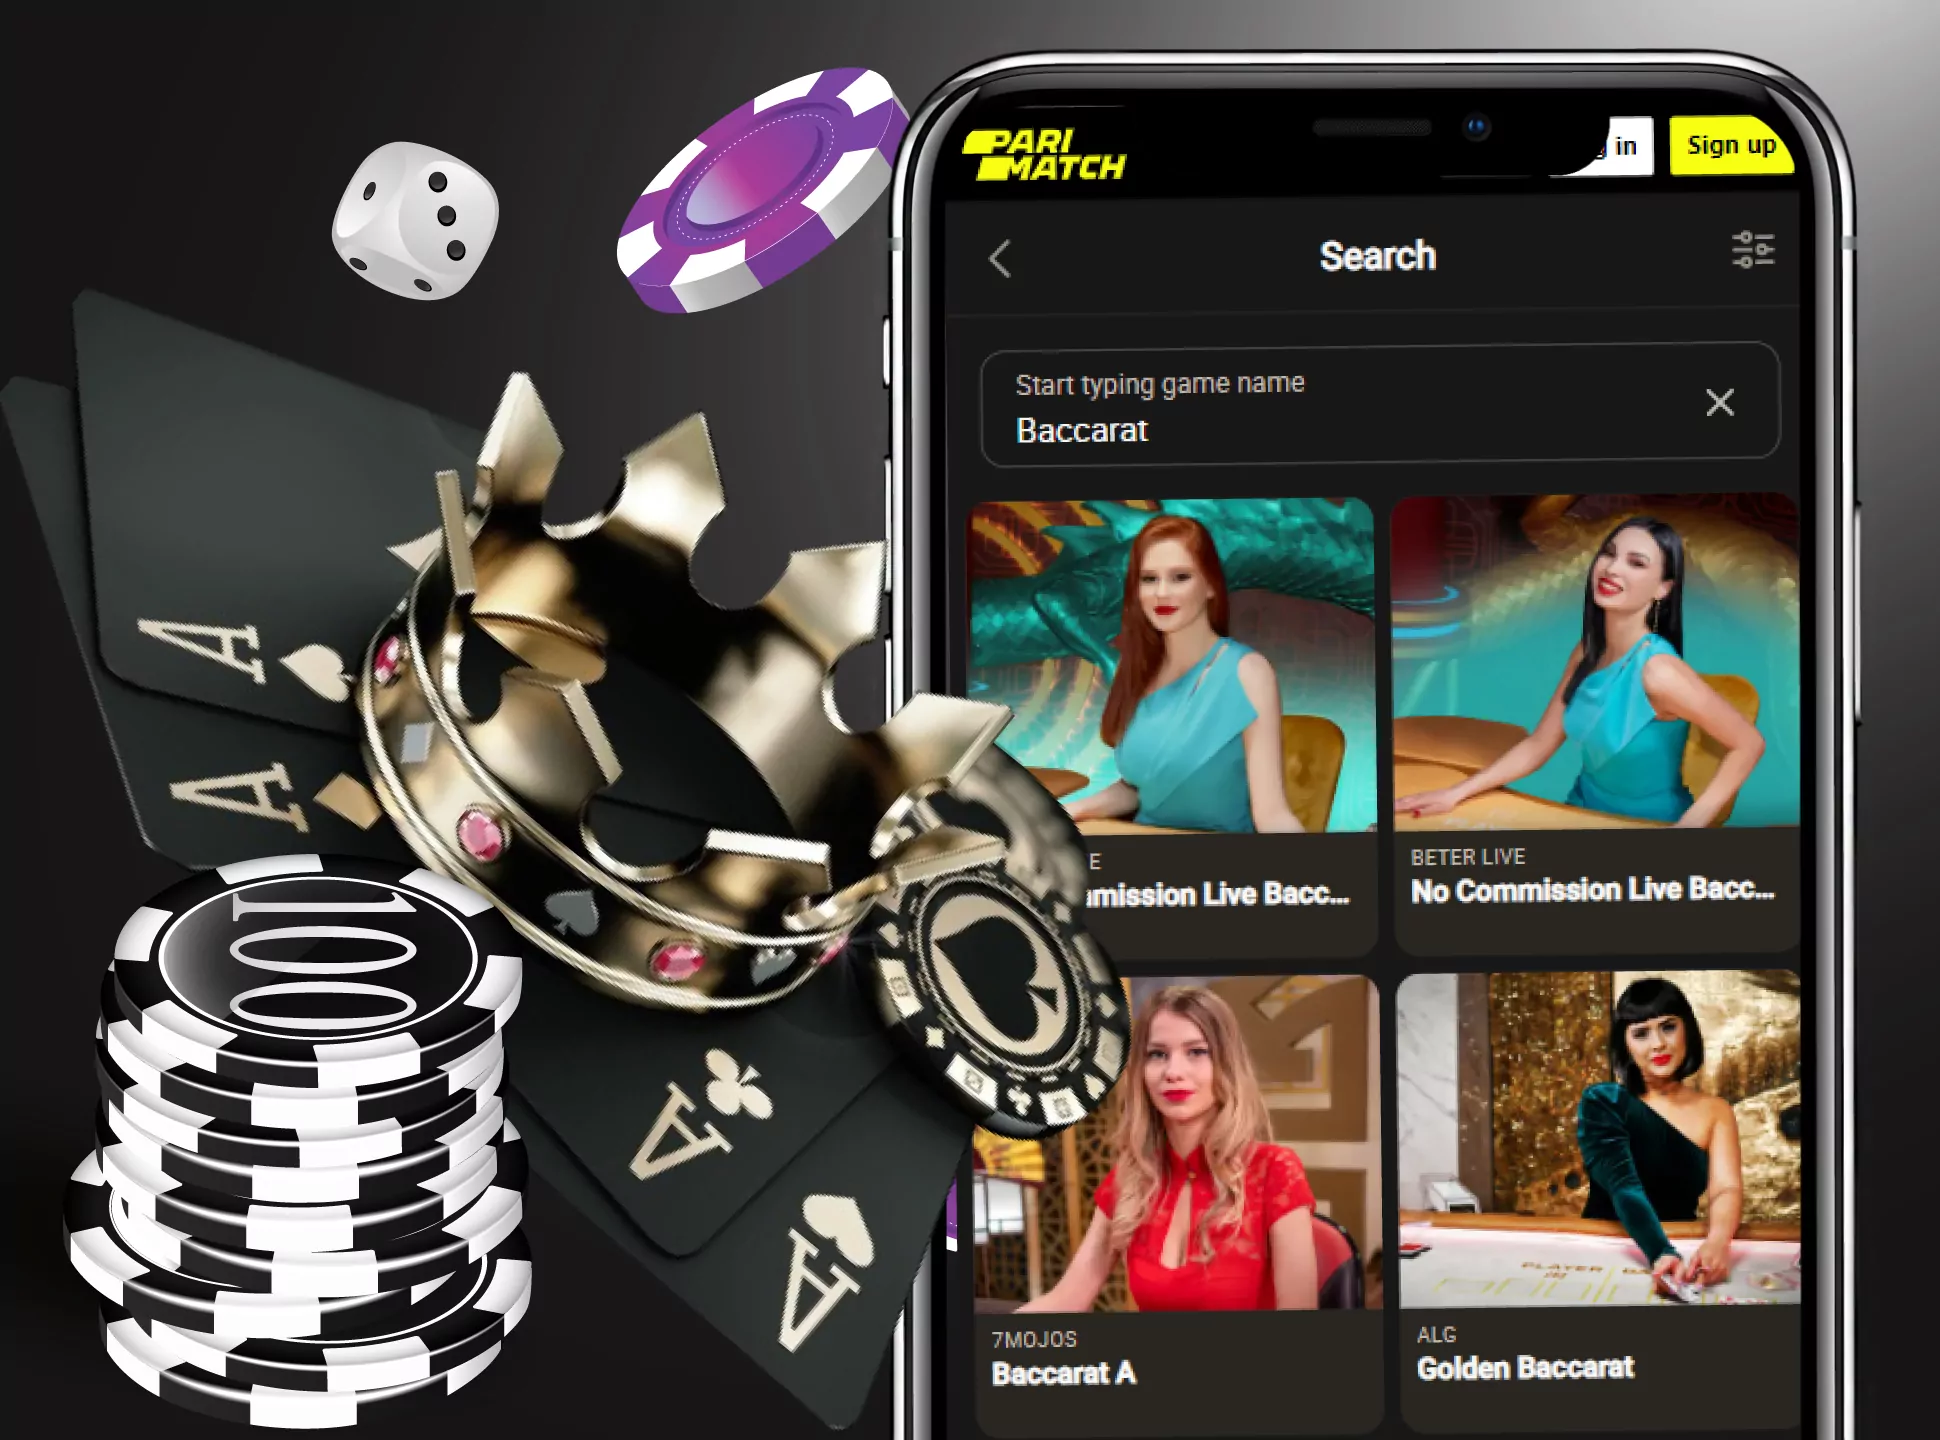 Baccarat games are available in the Parimatch app.